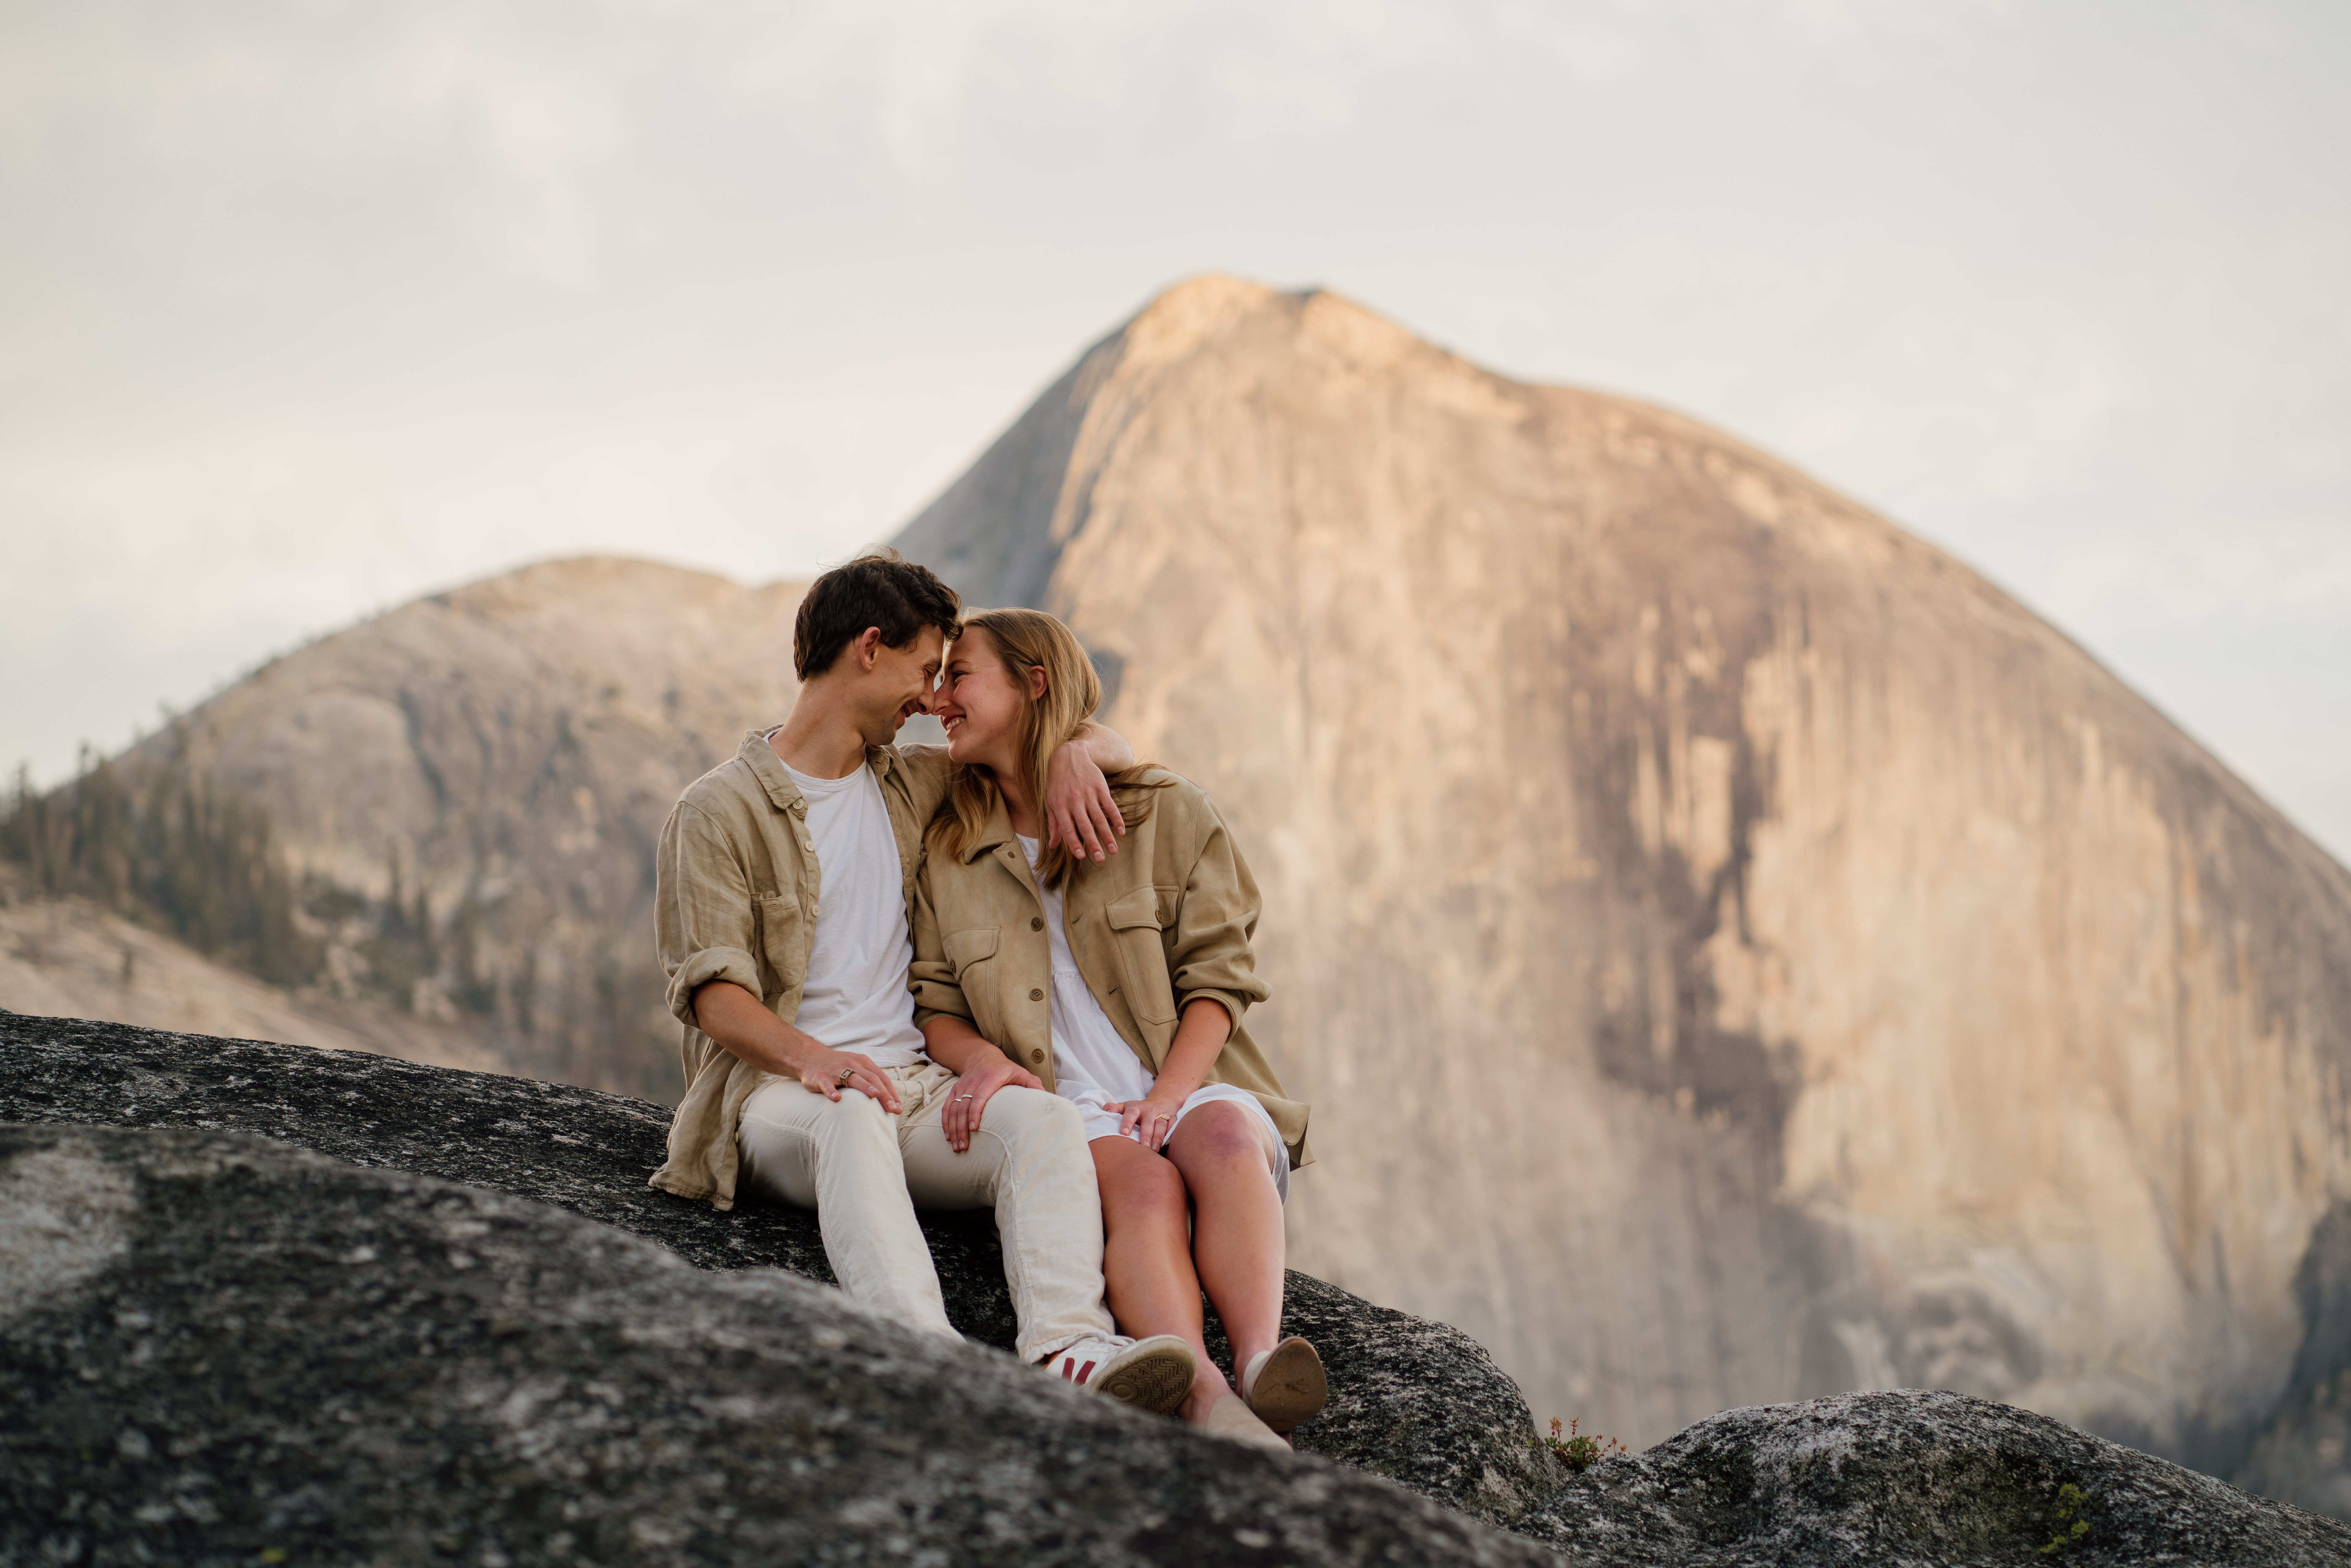 Couple with Half dome in background after a Yosemite National Park Proposal.